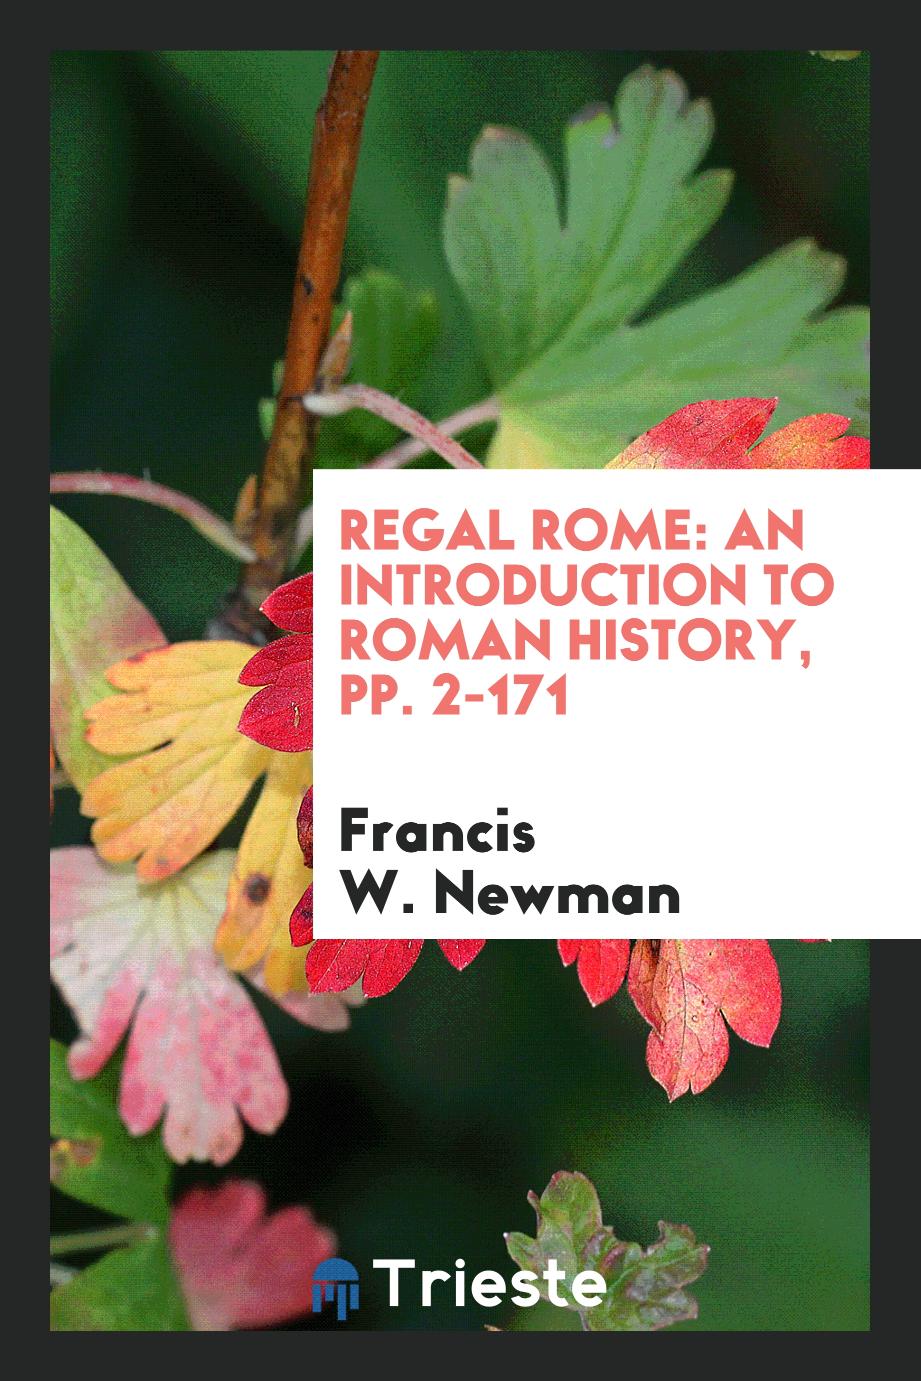 Regal Rome: An Introduction to Roman History, pp. 2-171